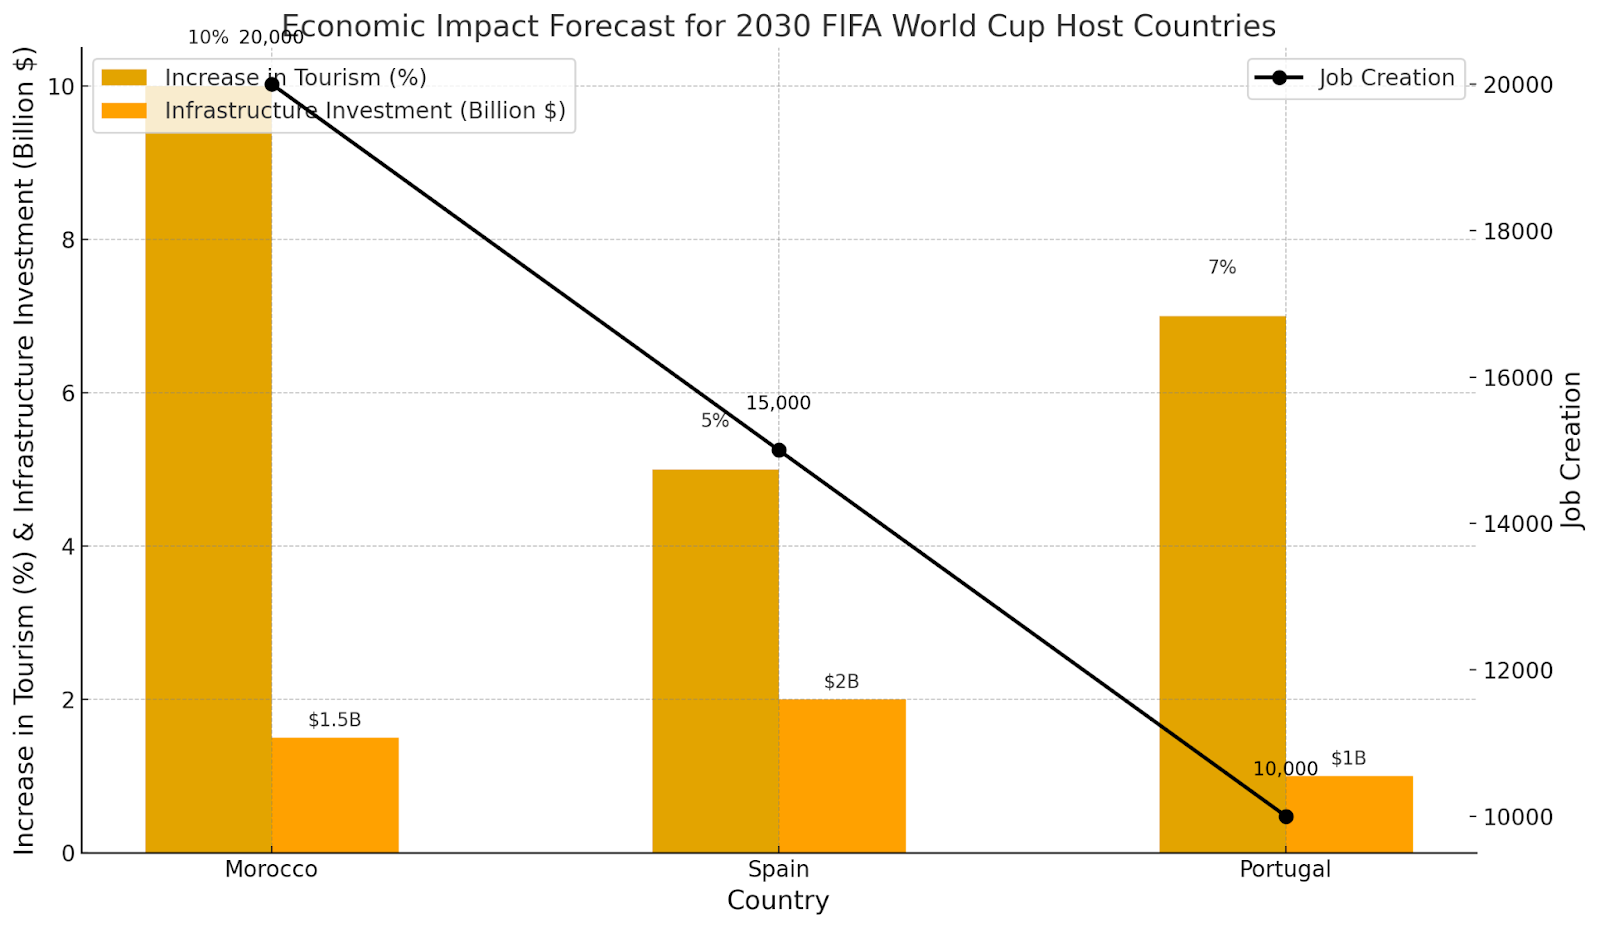 The graph presents the expected economic impact of hosting the 2030 FIFA World Cup across Morocco, Spain, and Portugal. It provides a detailed comparison of the anticipated increase in tourism, job creation estimates, and infrastructure investment for each host country.